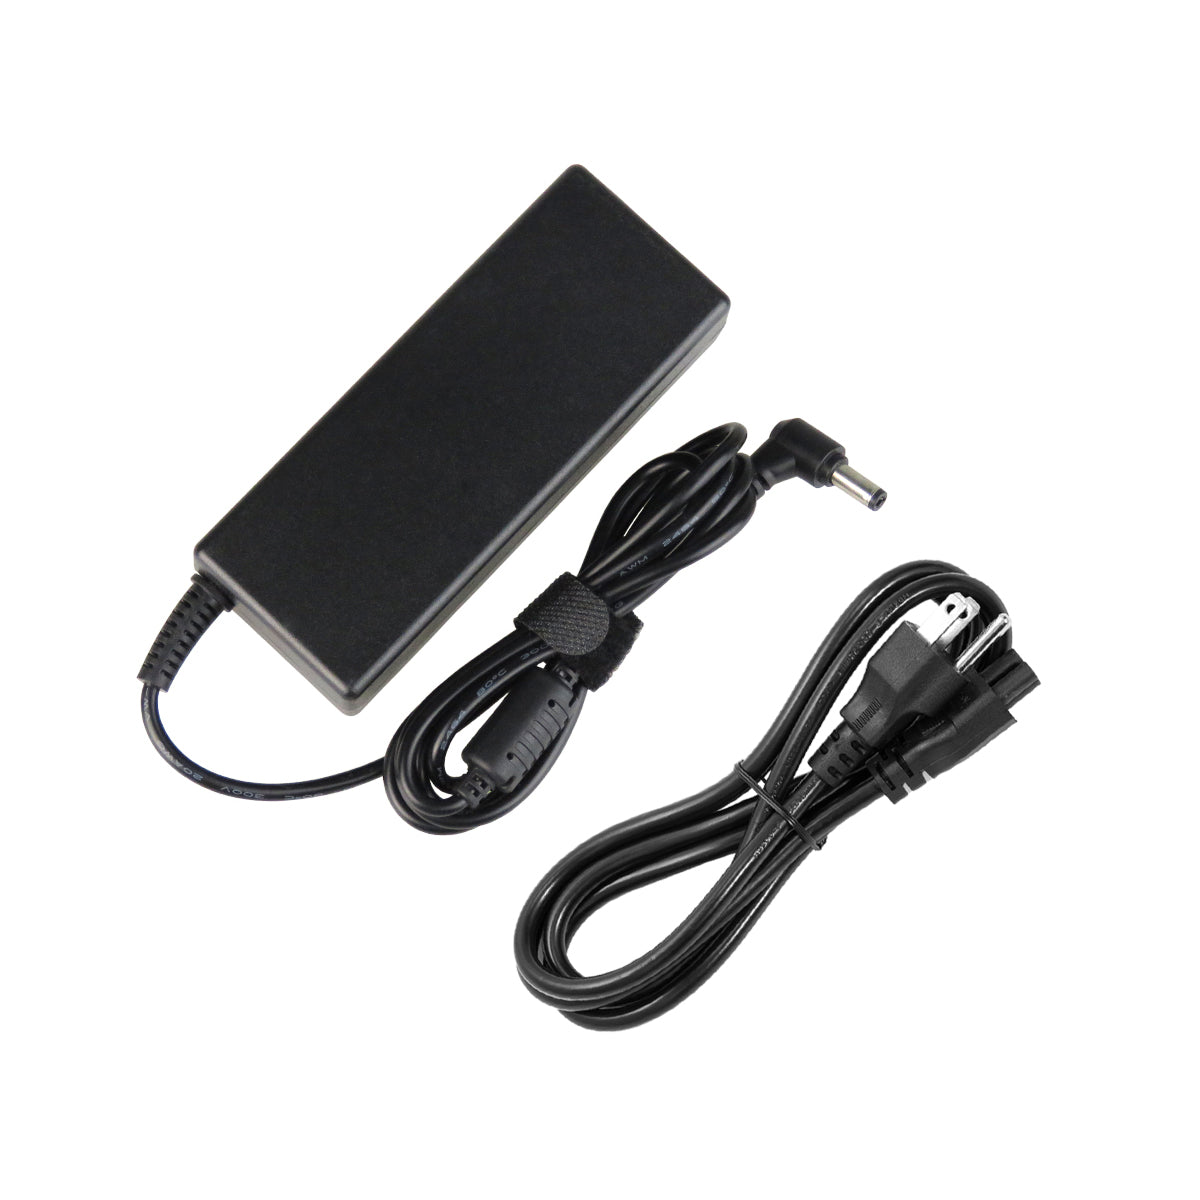 AC Adapter Charger for ASUS u50f Series Notebook.